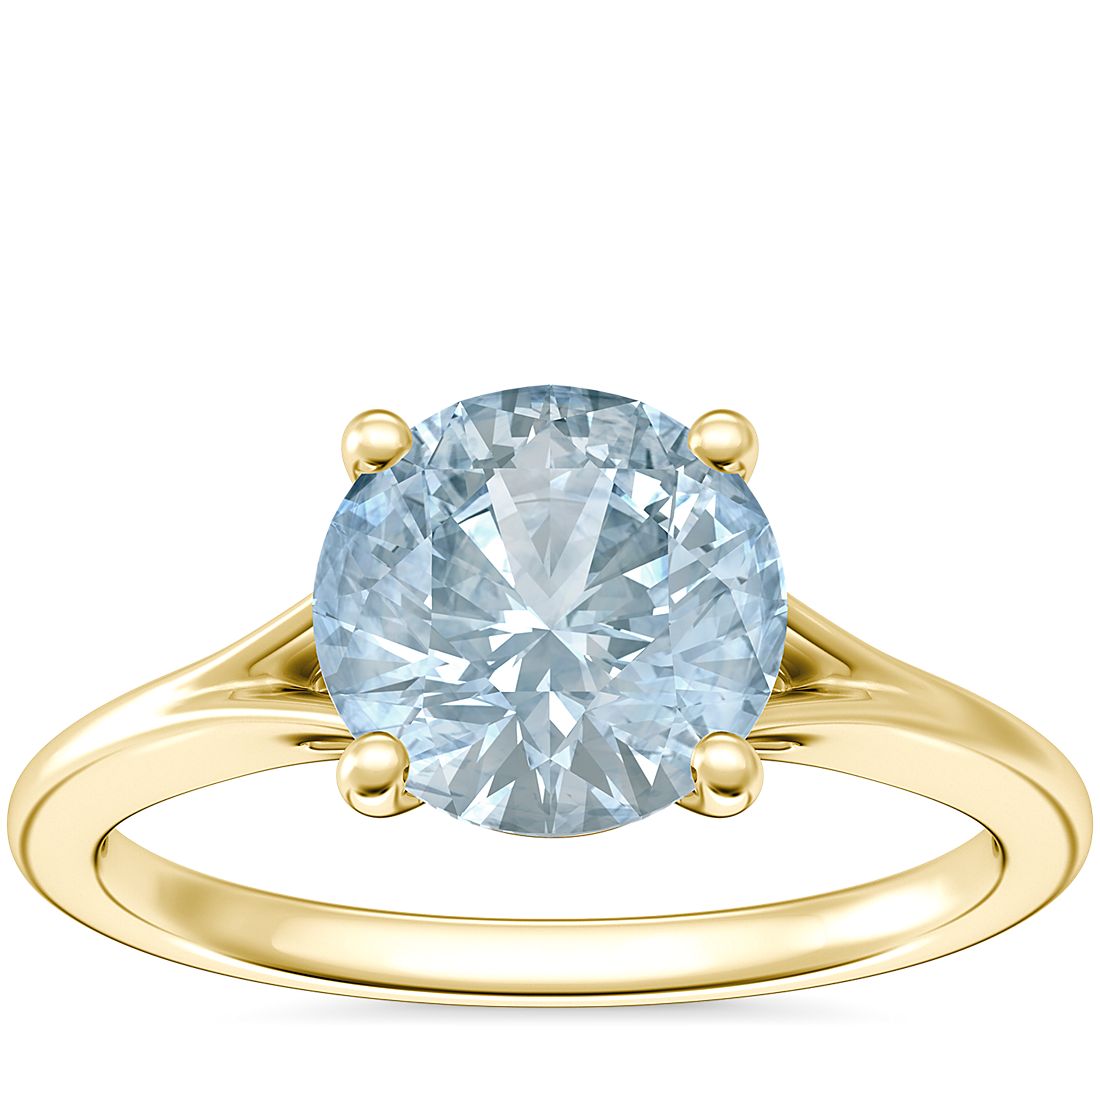 Petite Split Shank Solitaire Engagement Ring with Round Aquamarine in 18k Yellow Gold (8mm)